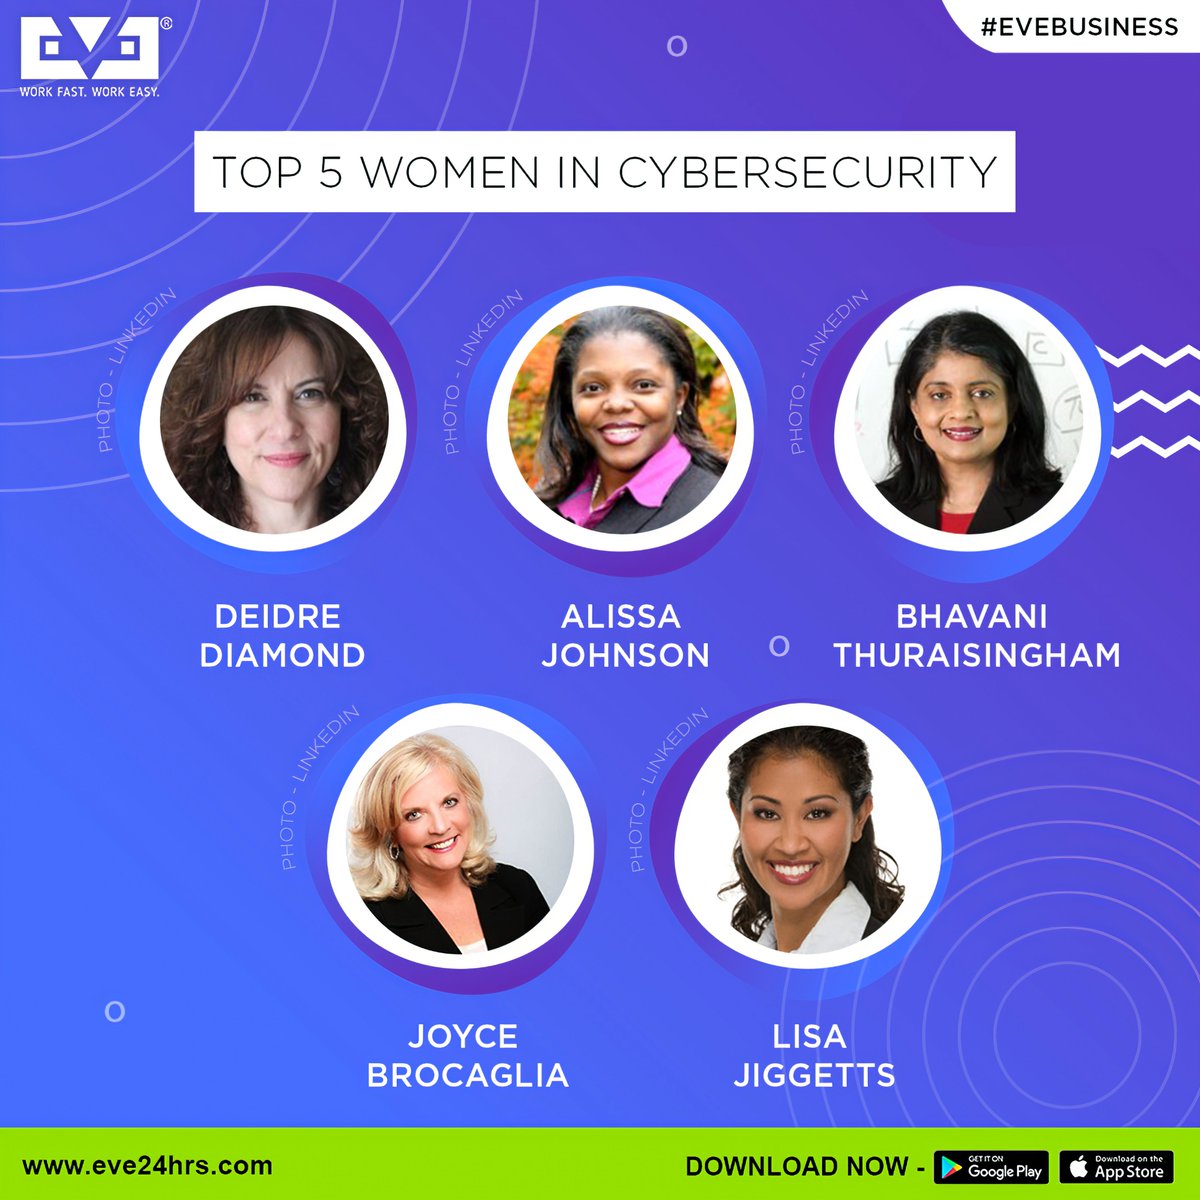 More power to these powerhouses...May you always be there to keep our cyberspace secure.

#Throwback #WomensDay #WomensDay2020 #IWD2020
#EveApp #EveBusiness #EveBusinessApp #WorkFastWorkEasy
#DeidreDiamond
#AlissaJohnson
#JoyceBrocaglia
#BhavaniThuraisingham
#LisaJiggetts